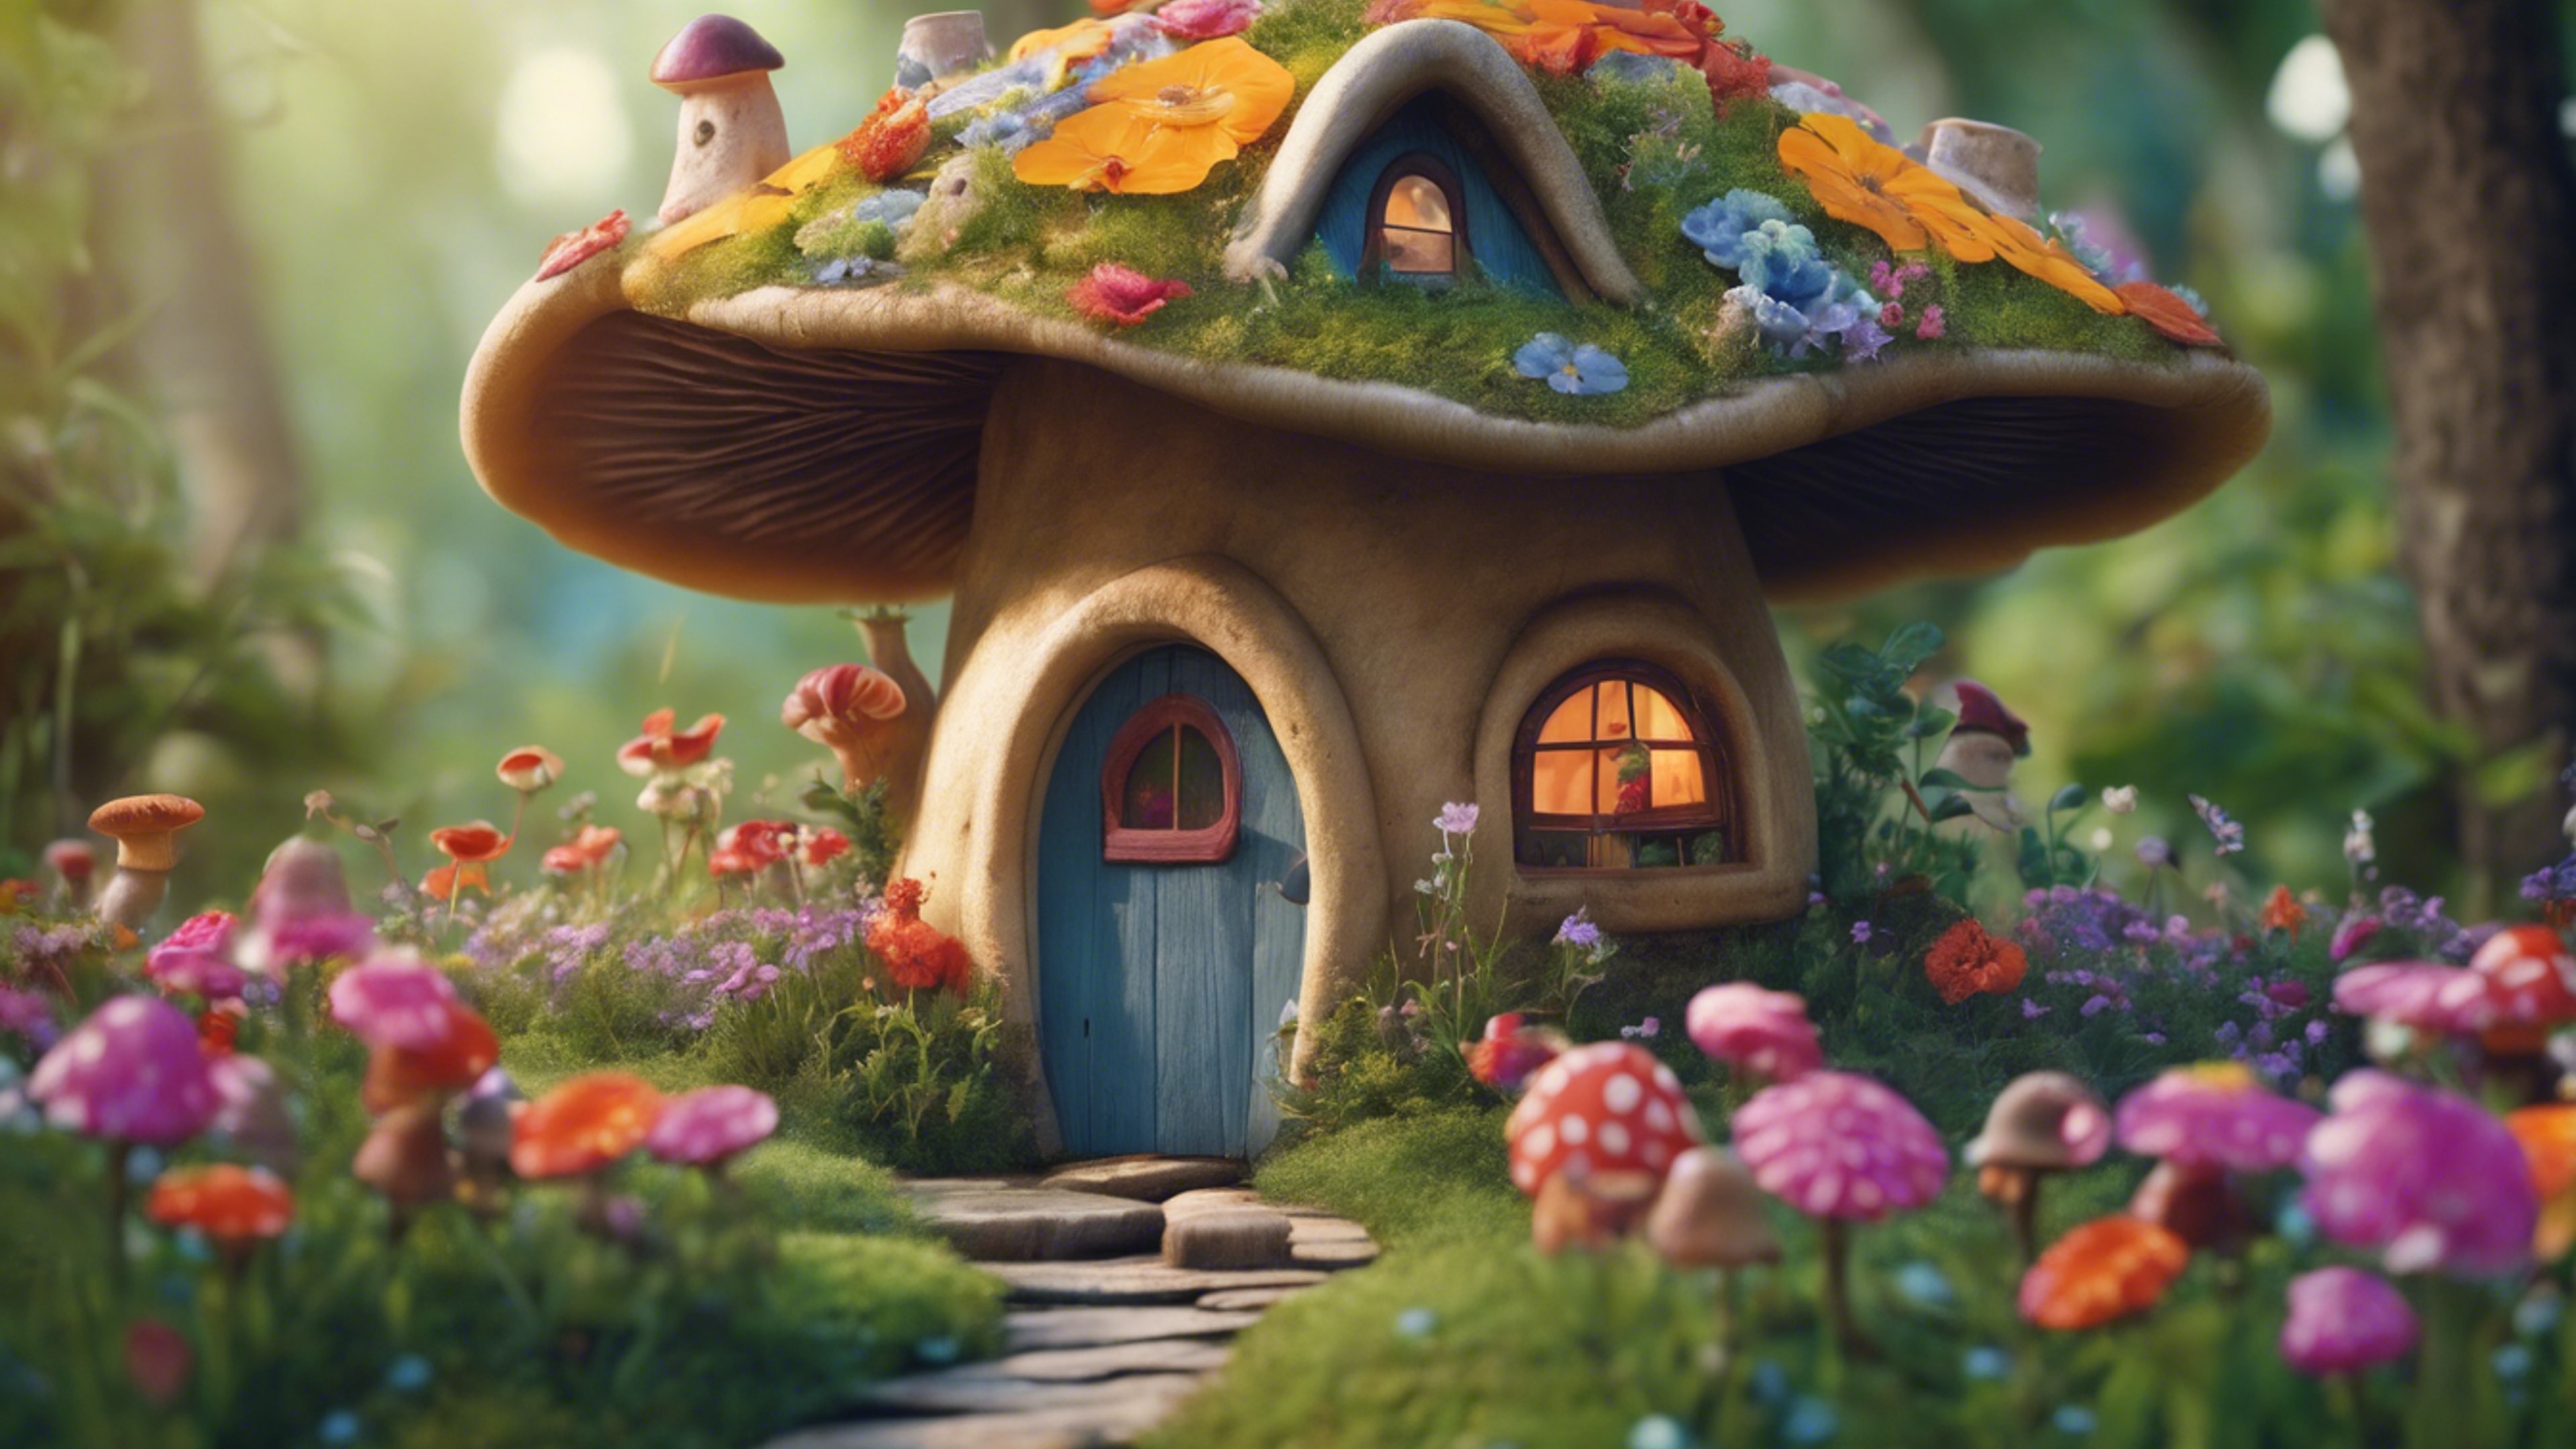 An old-fashioned, whimsical mushroom house, straight out of a children's storybook, nestled amid colorful flowers at the end of a winding path. Tapeta[bbbff29f860842789321]